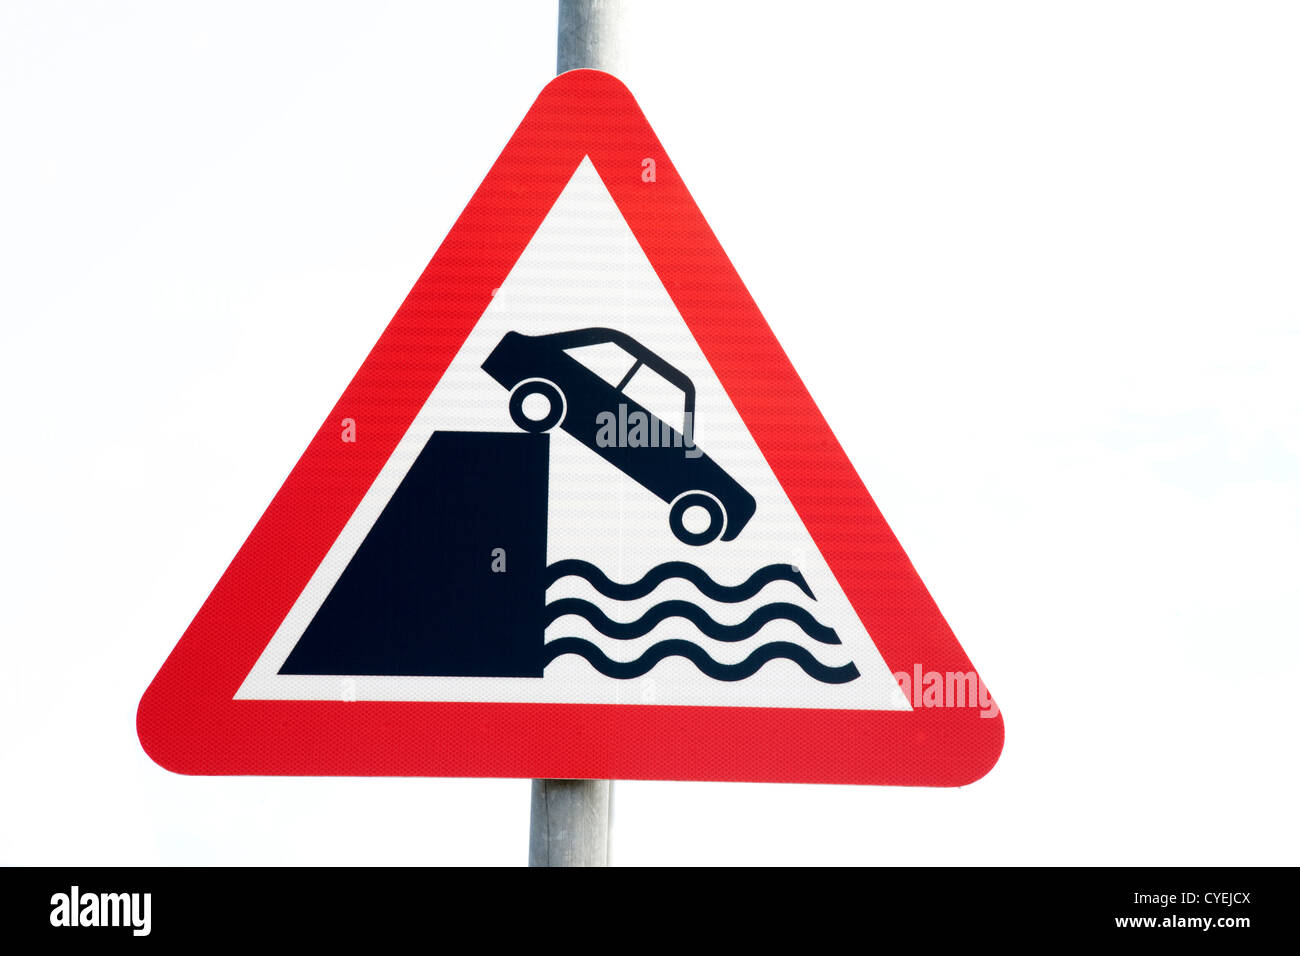 Road Safety Sign against Pure White Background Stock Photo